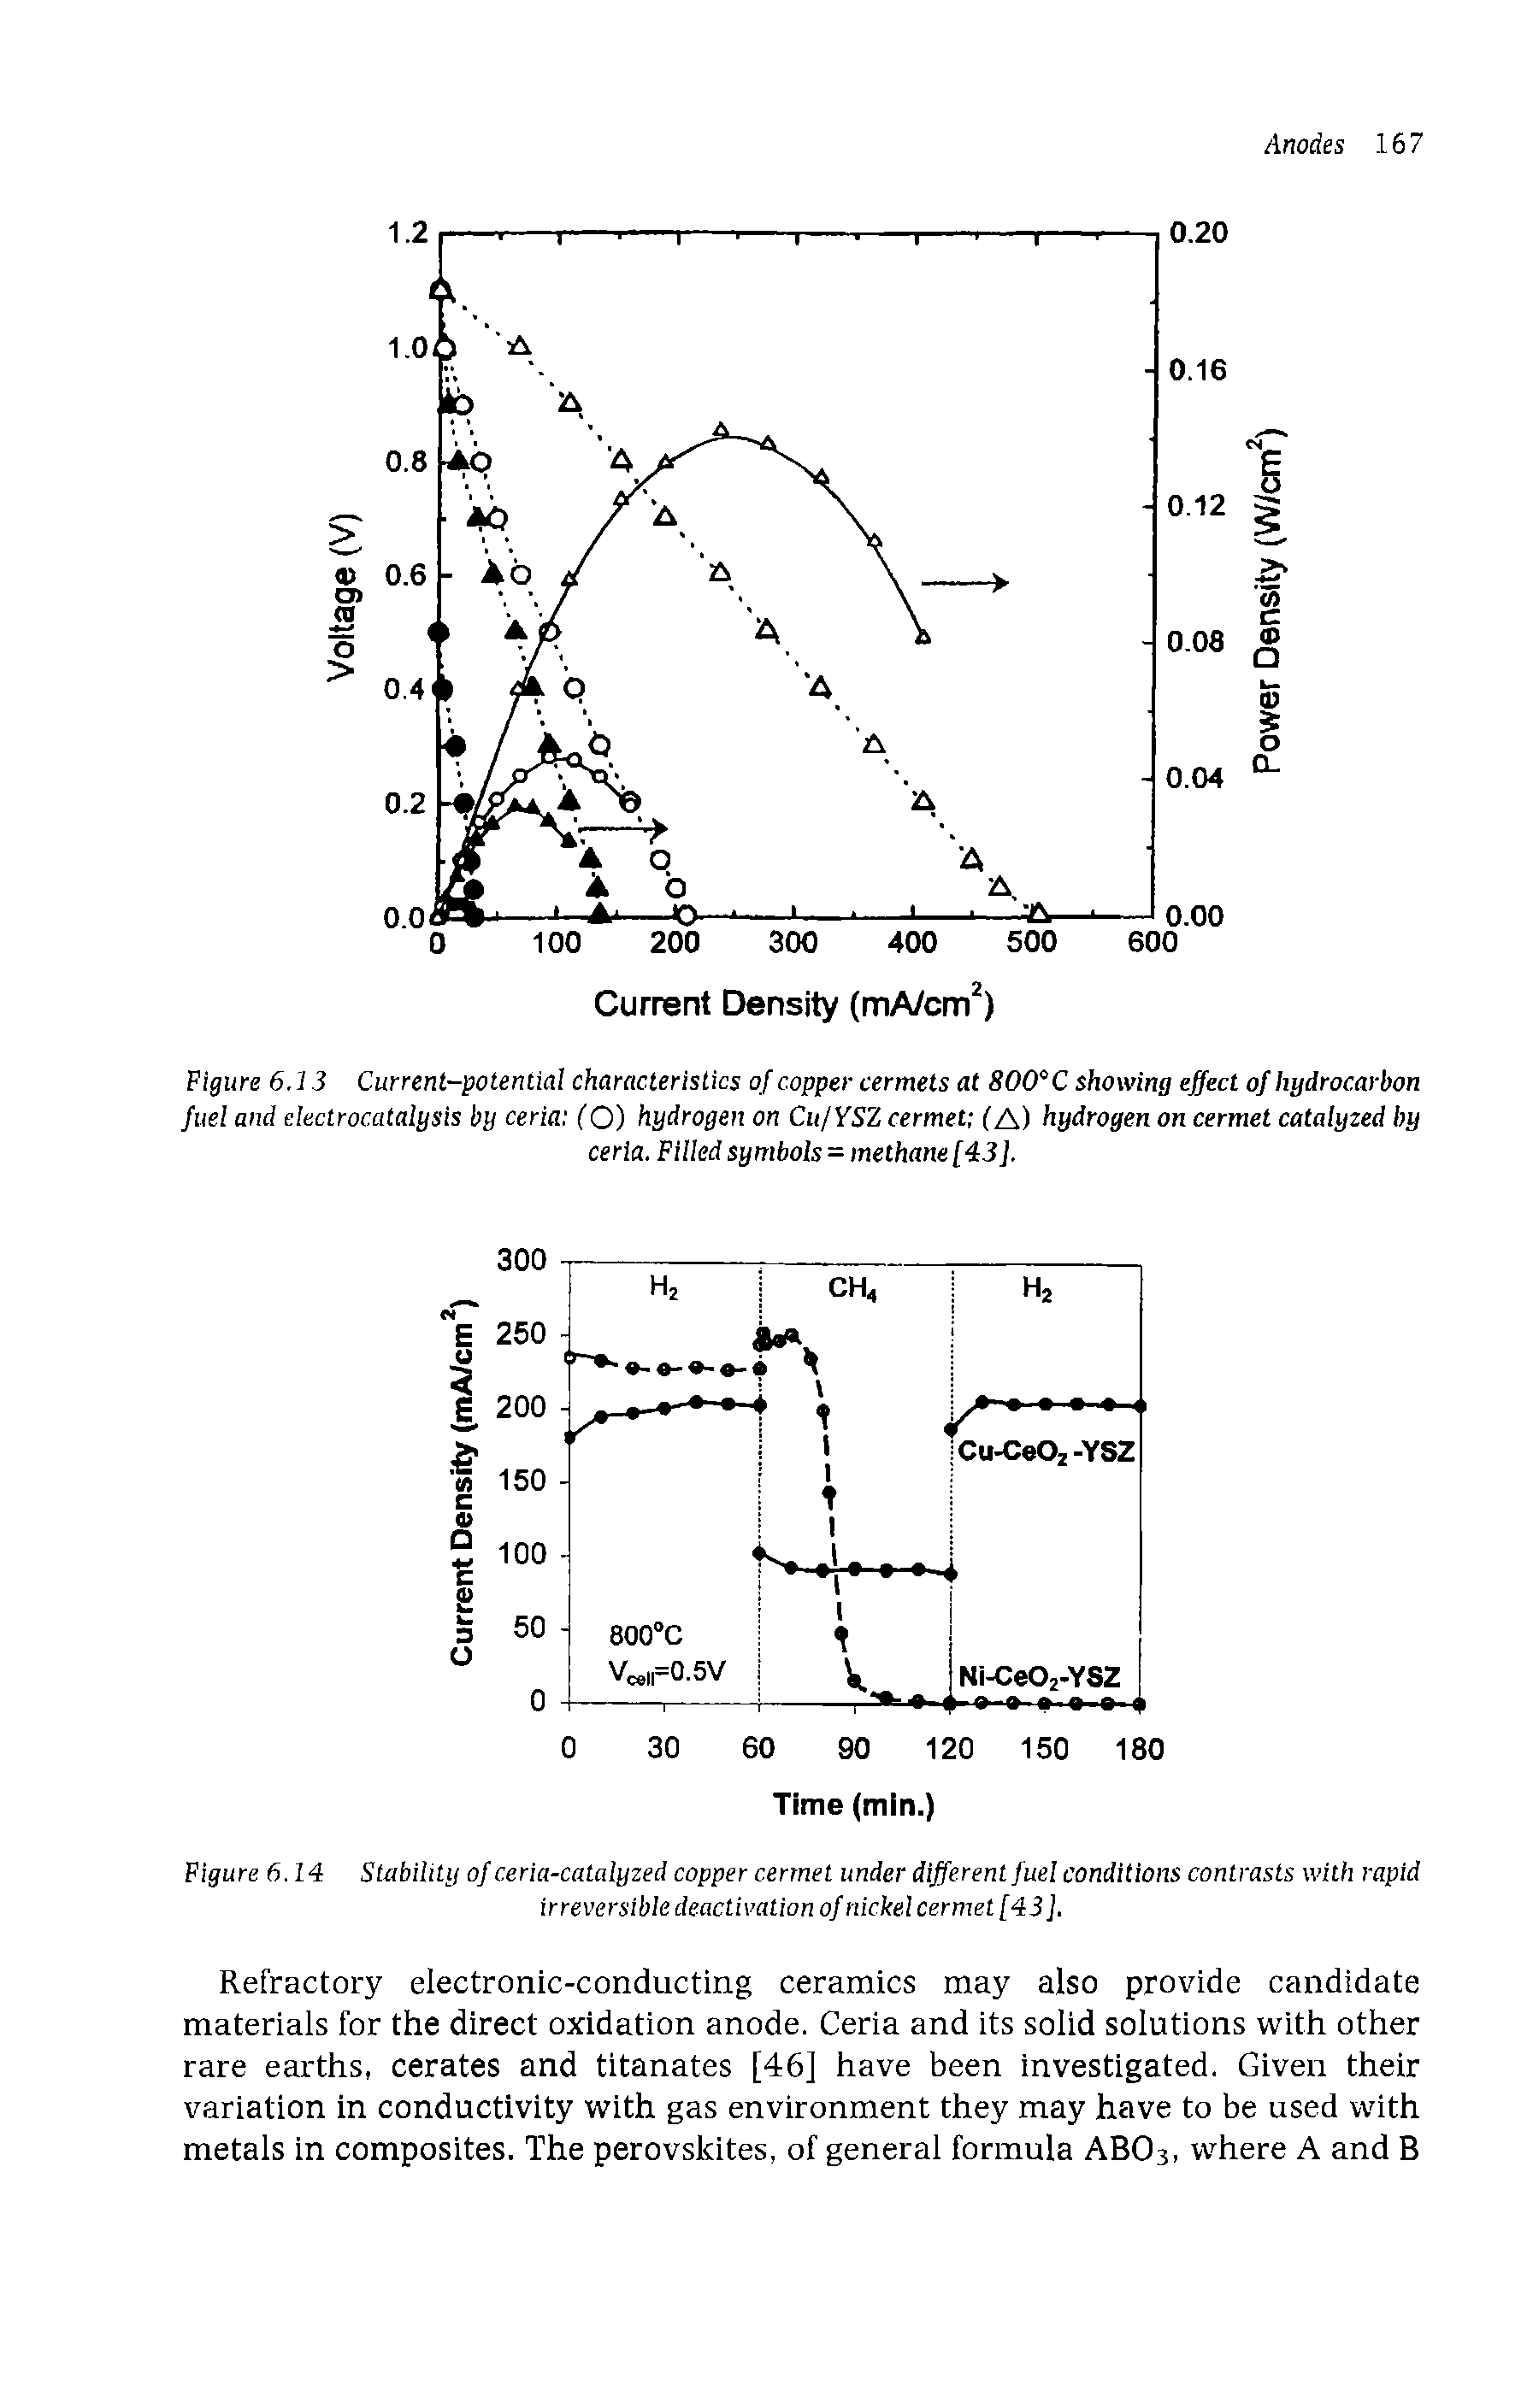 Figure 6.14 Stability of ceria-catalyzed copper cermet under different fuel conditions contrasts with rapid irreversible deactivation of nickel cermet [43].